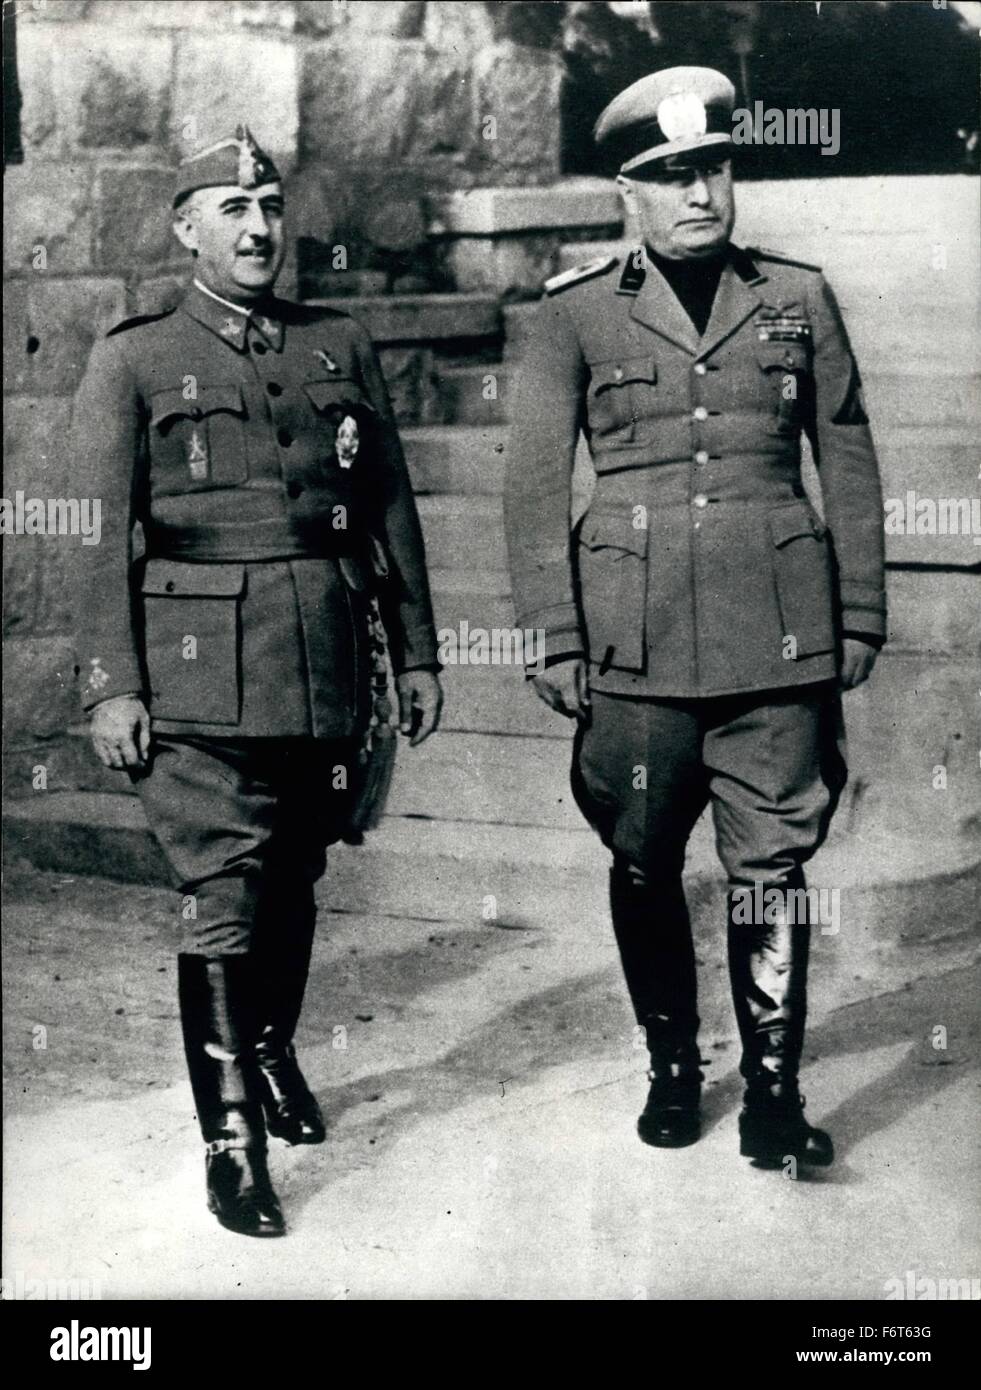 ¿Cuánto mide Benito Mussolini? - Altura - Real height 1935-c10